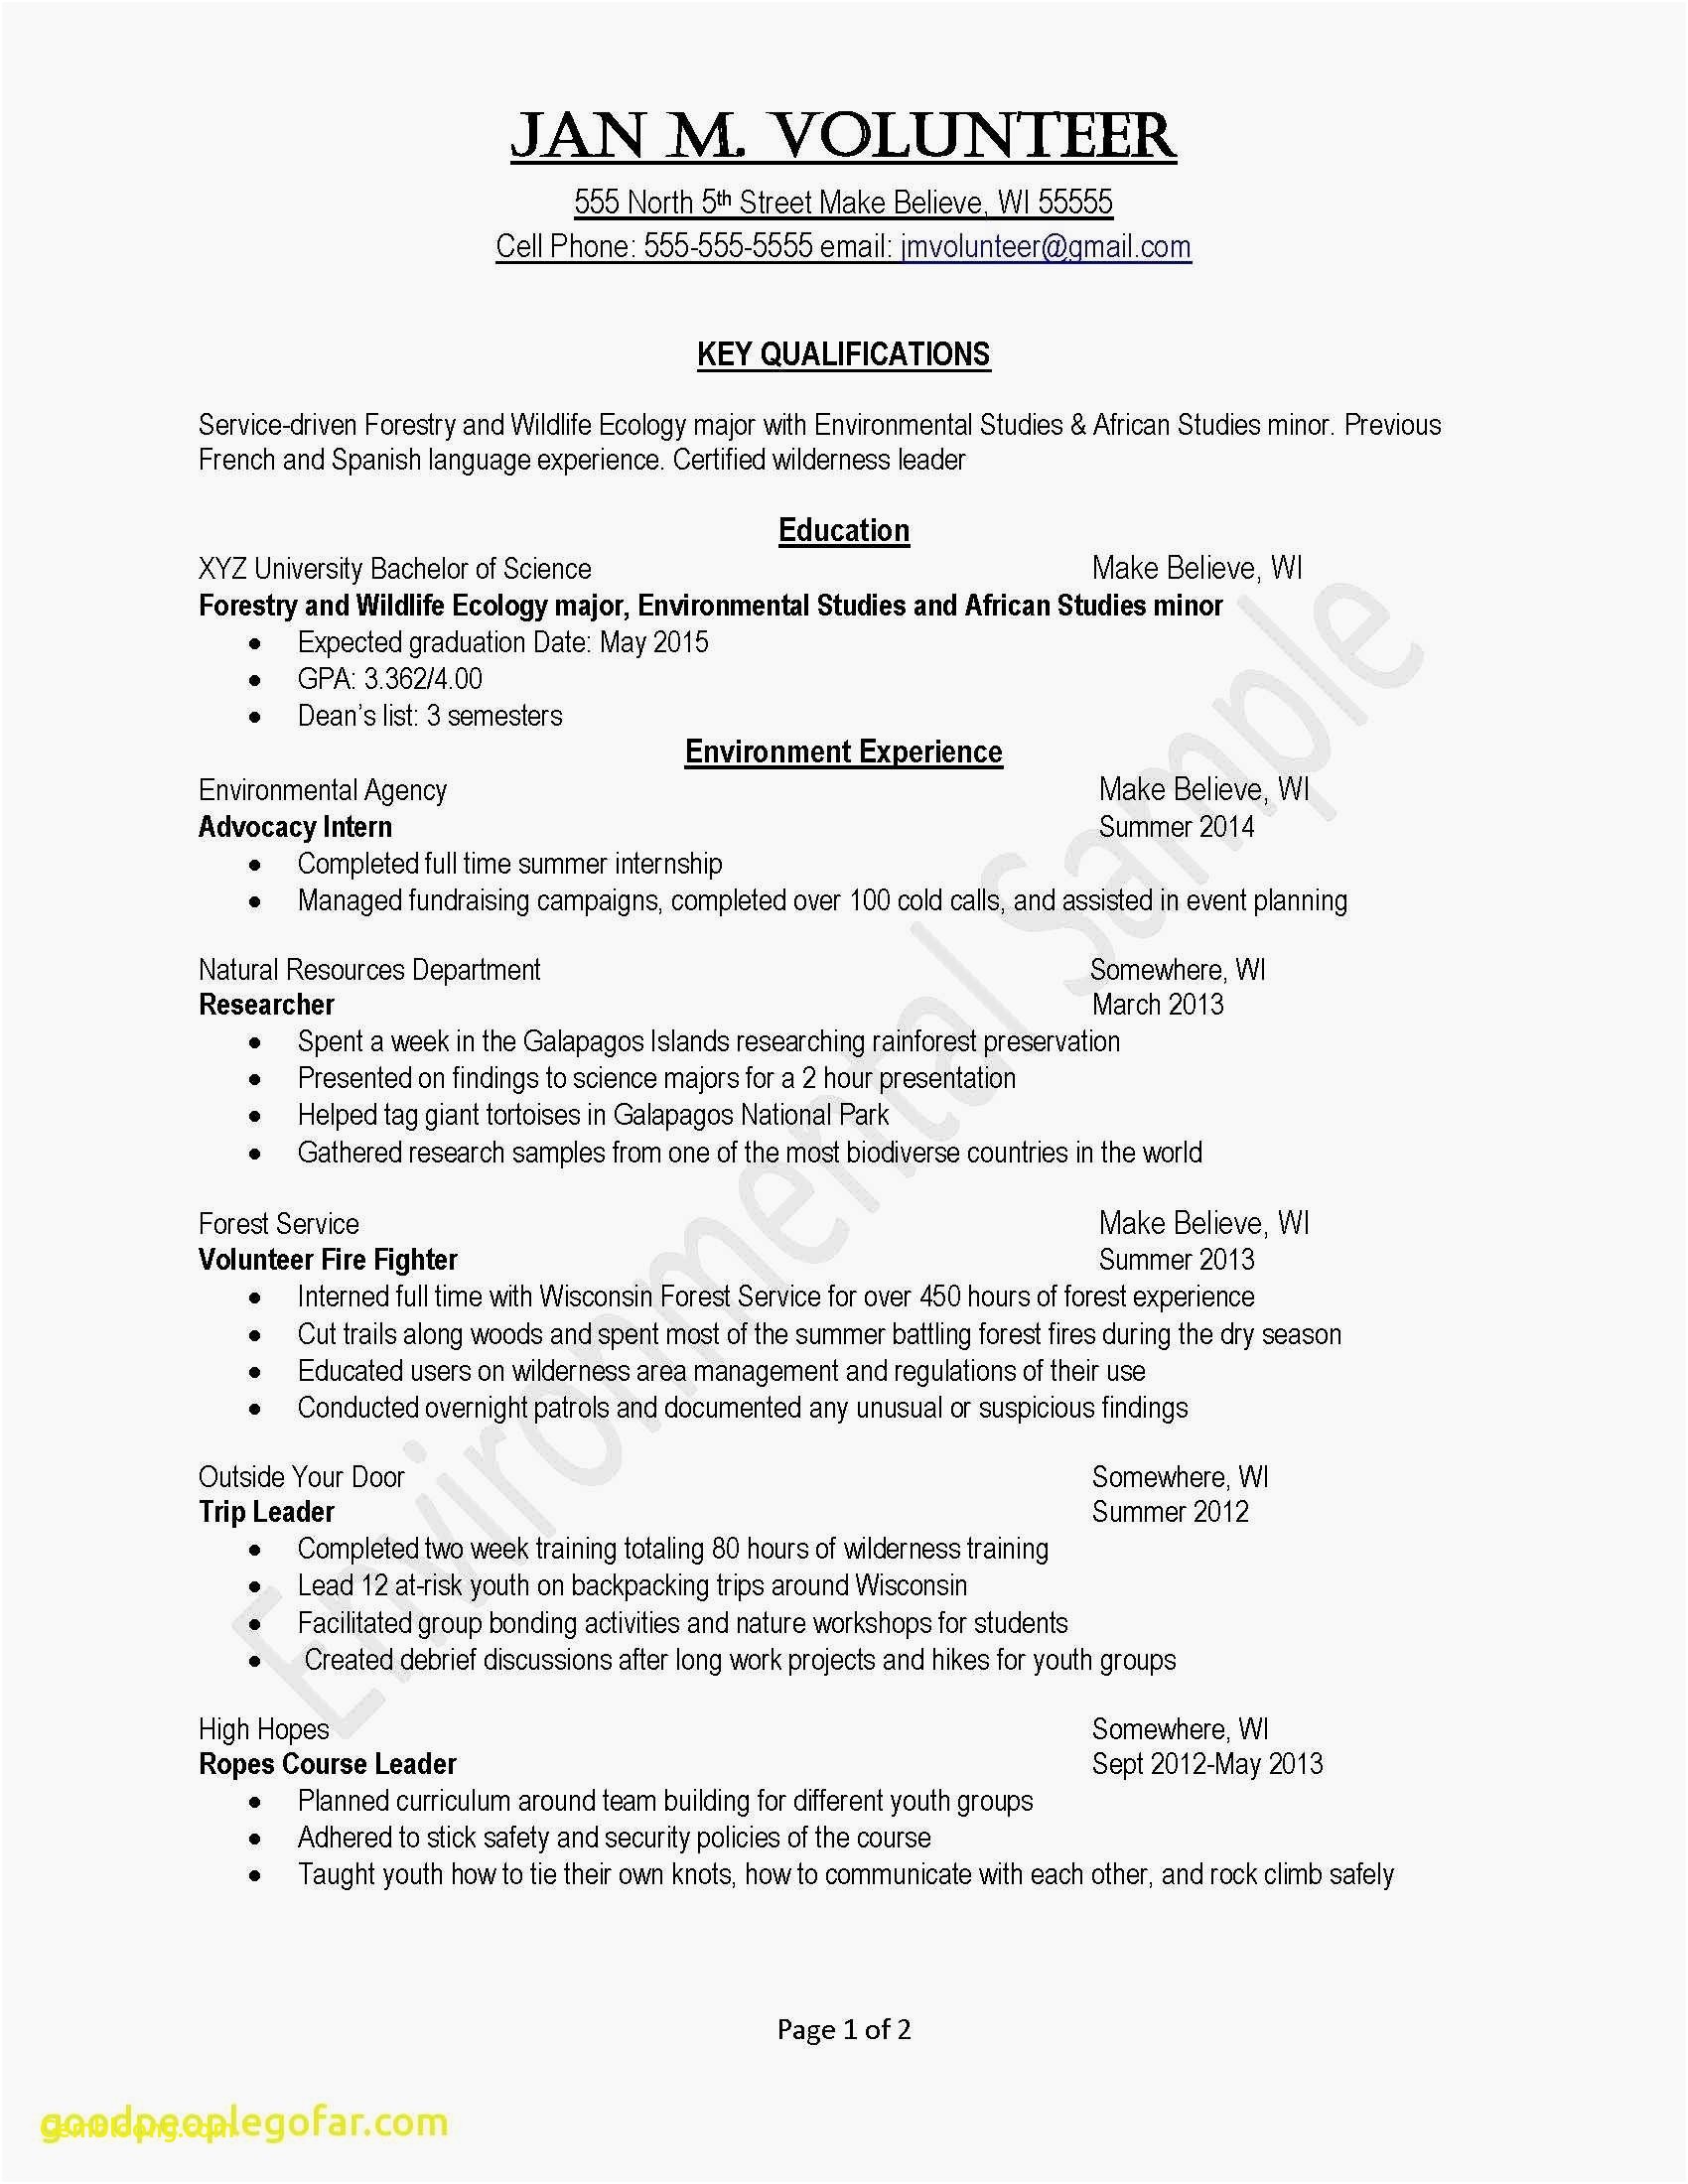 How To Type A Resume How To Type Resume Beautiful Download Fresh Types Resumes Of How To Type Resume how to type a resume|wikiresume.com